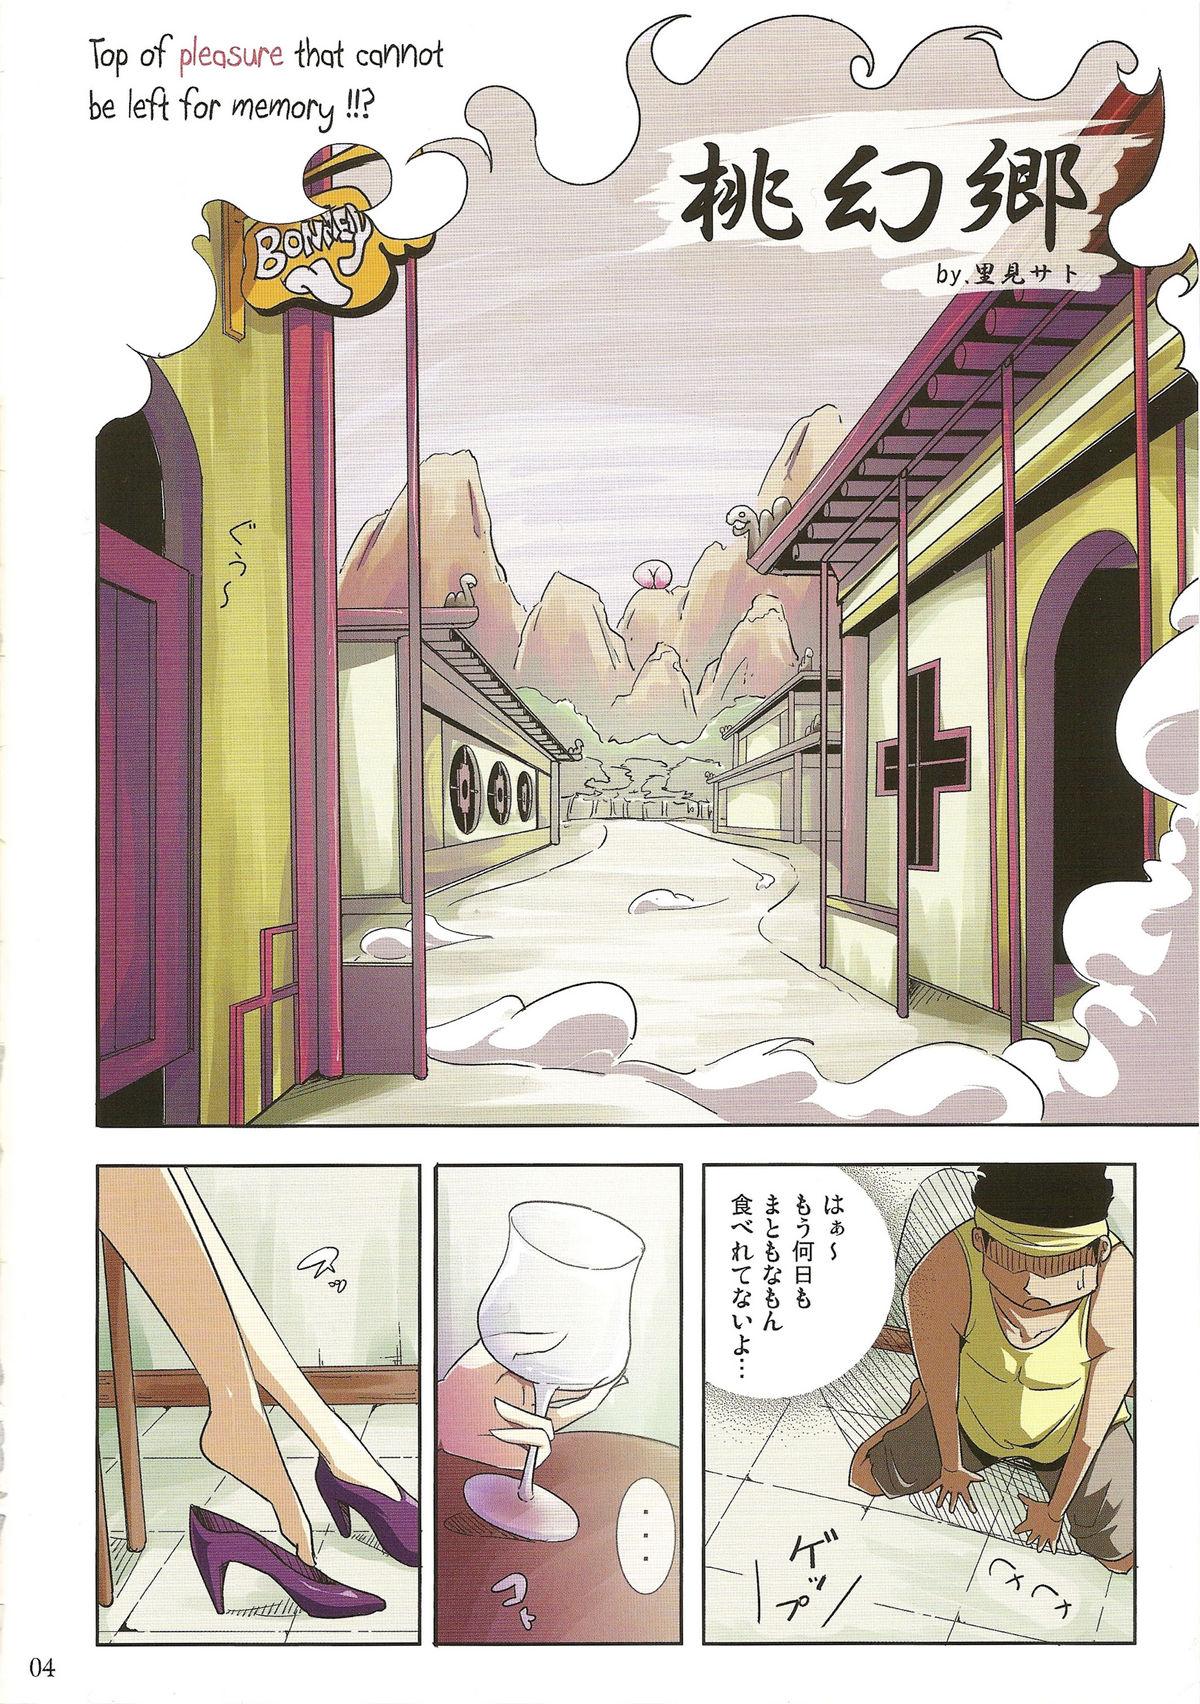 Beautiful Tougenkyou - One piece Super - Page 4